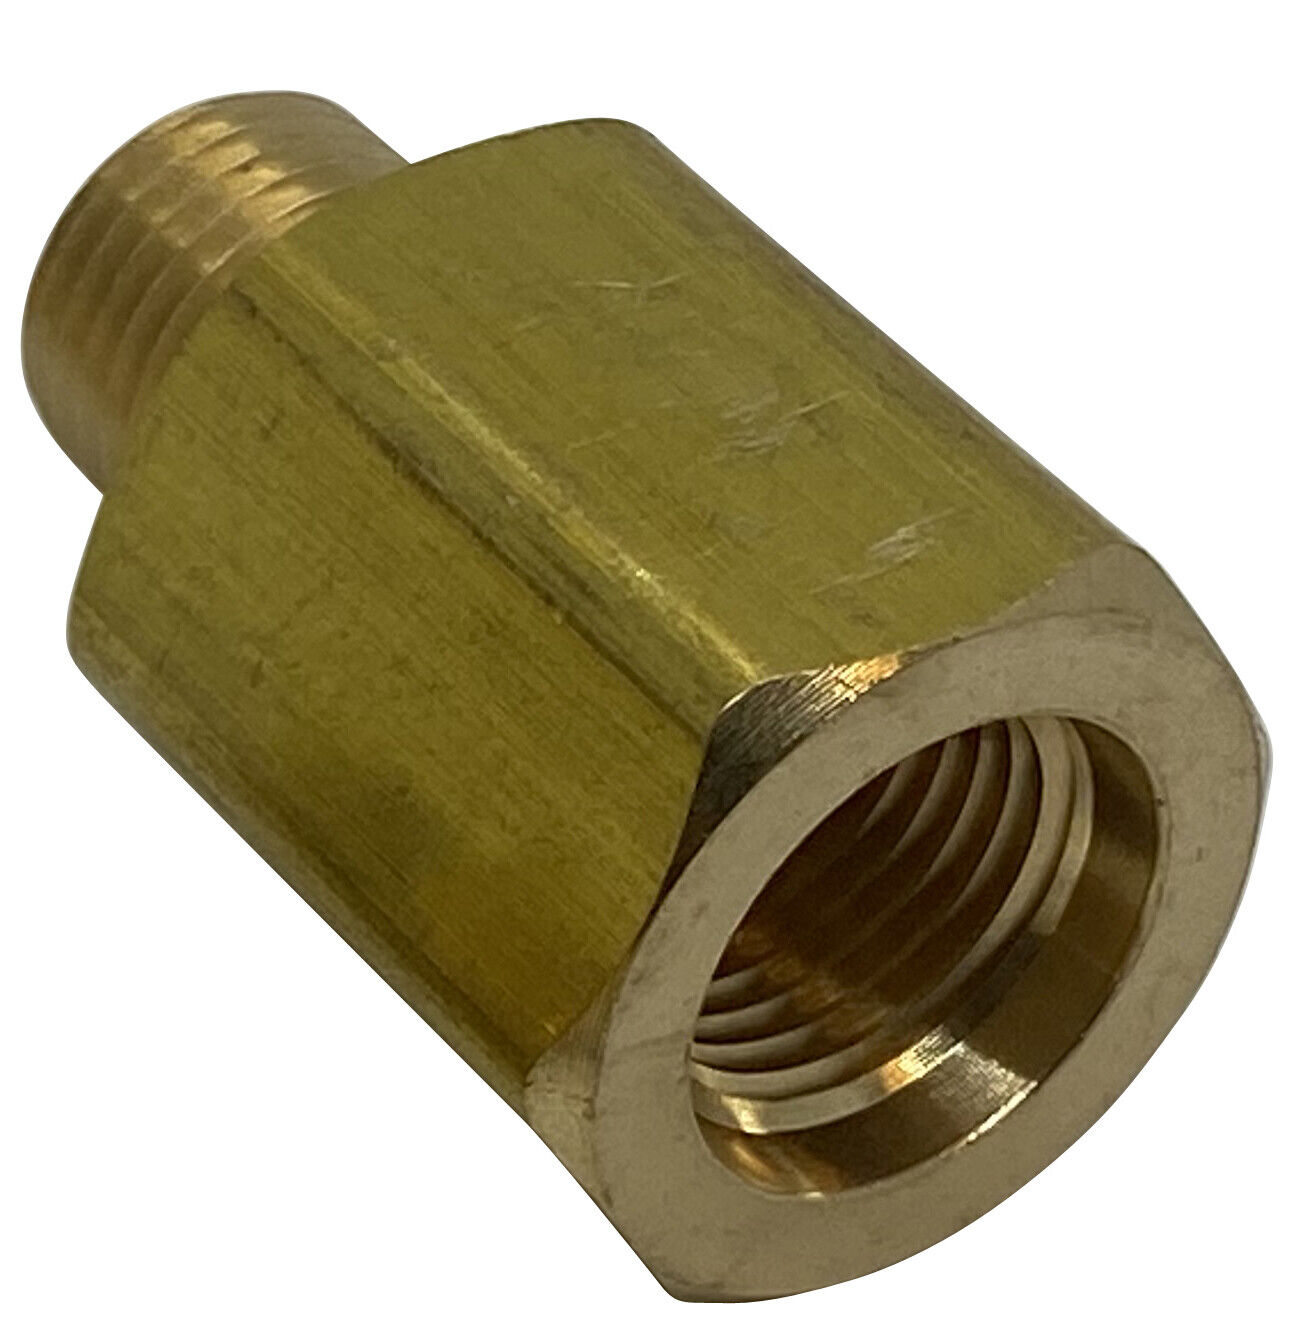 Adapter for Homefill Check Valve Nipple For Transfill / Glassblowing